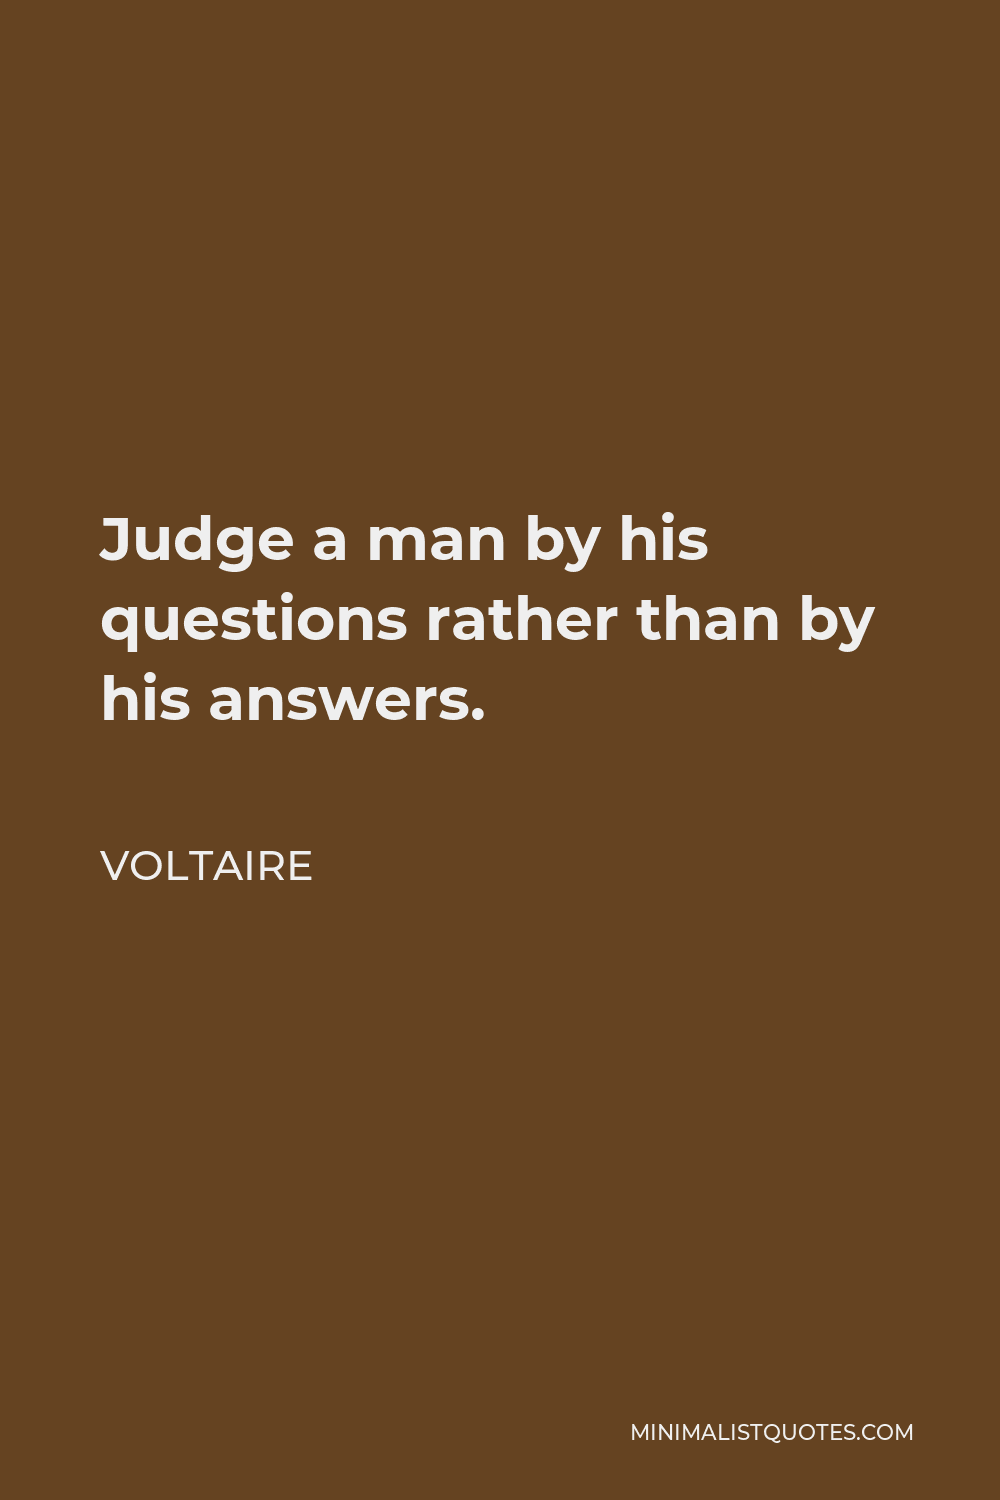 Voltaire Quote - Judge a man by his questions rather than by his answers.